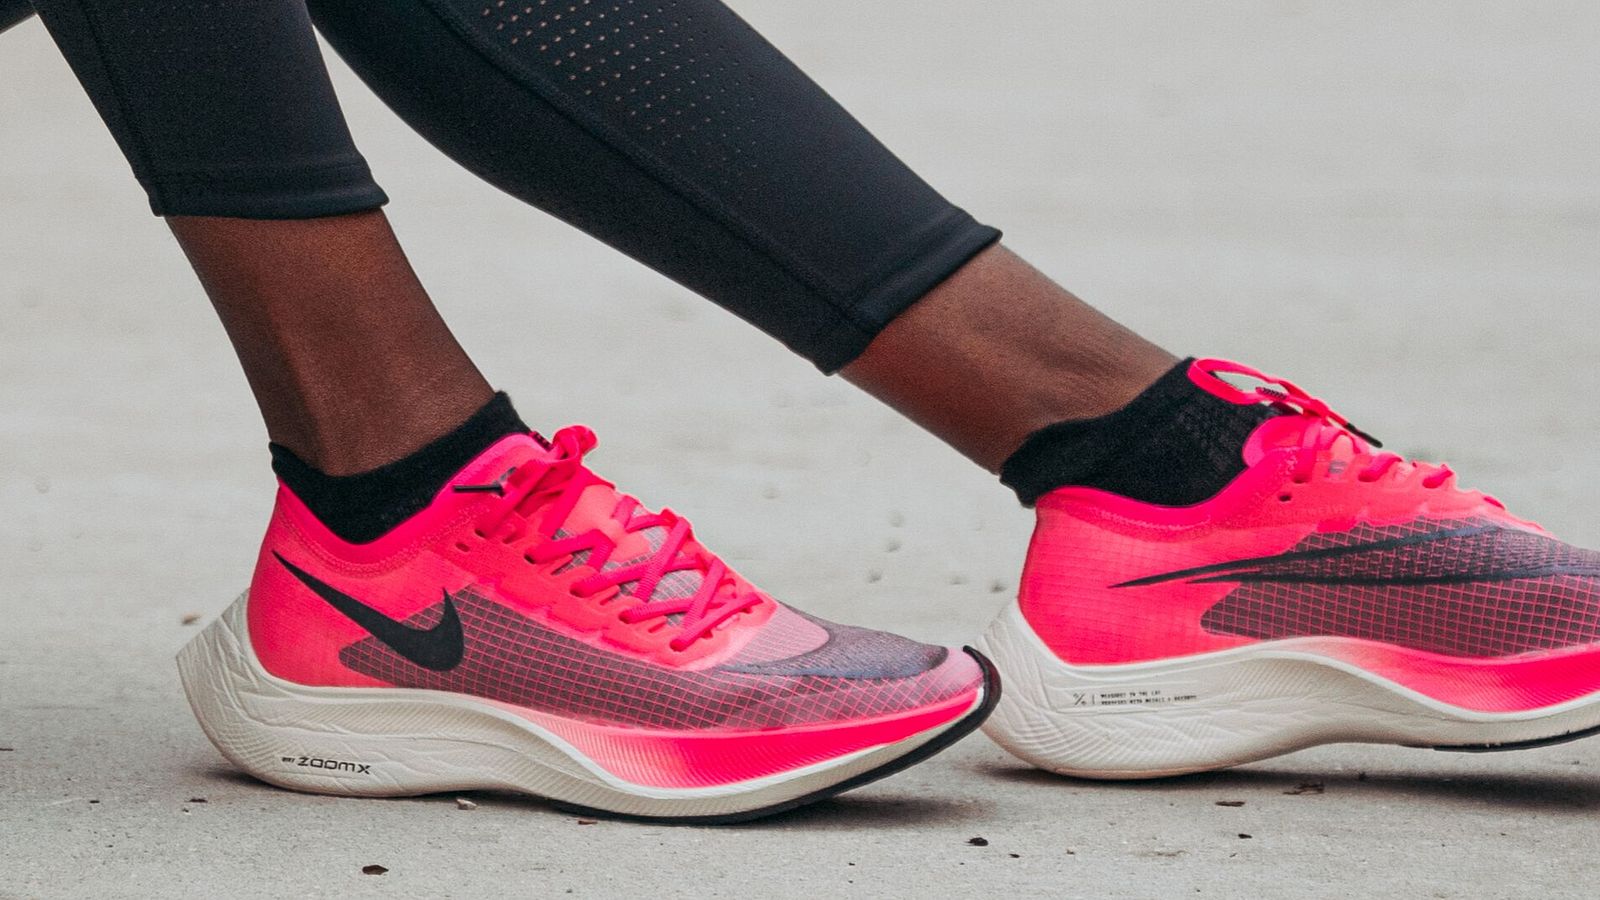 Nike ZoomX Vaporfly.. +80 Most Inspiring Workout Shoes Ideas for Women - 18